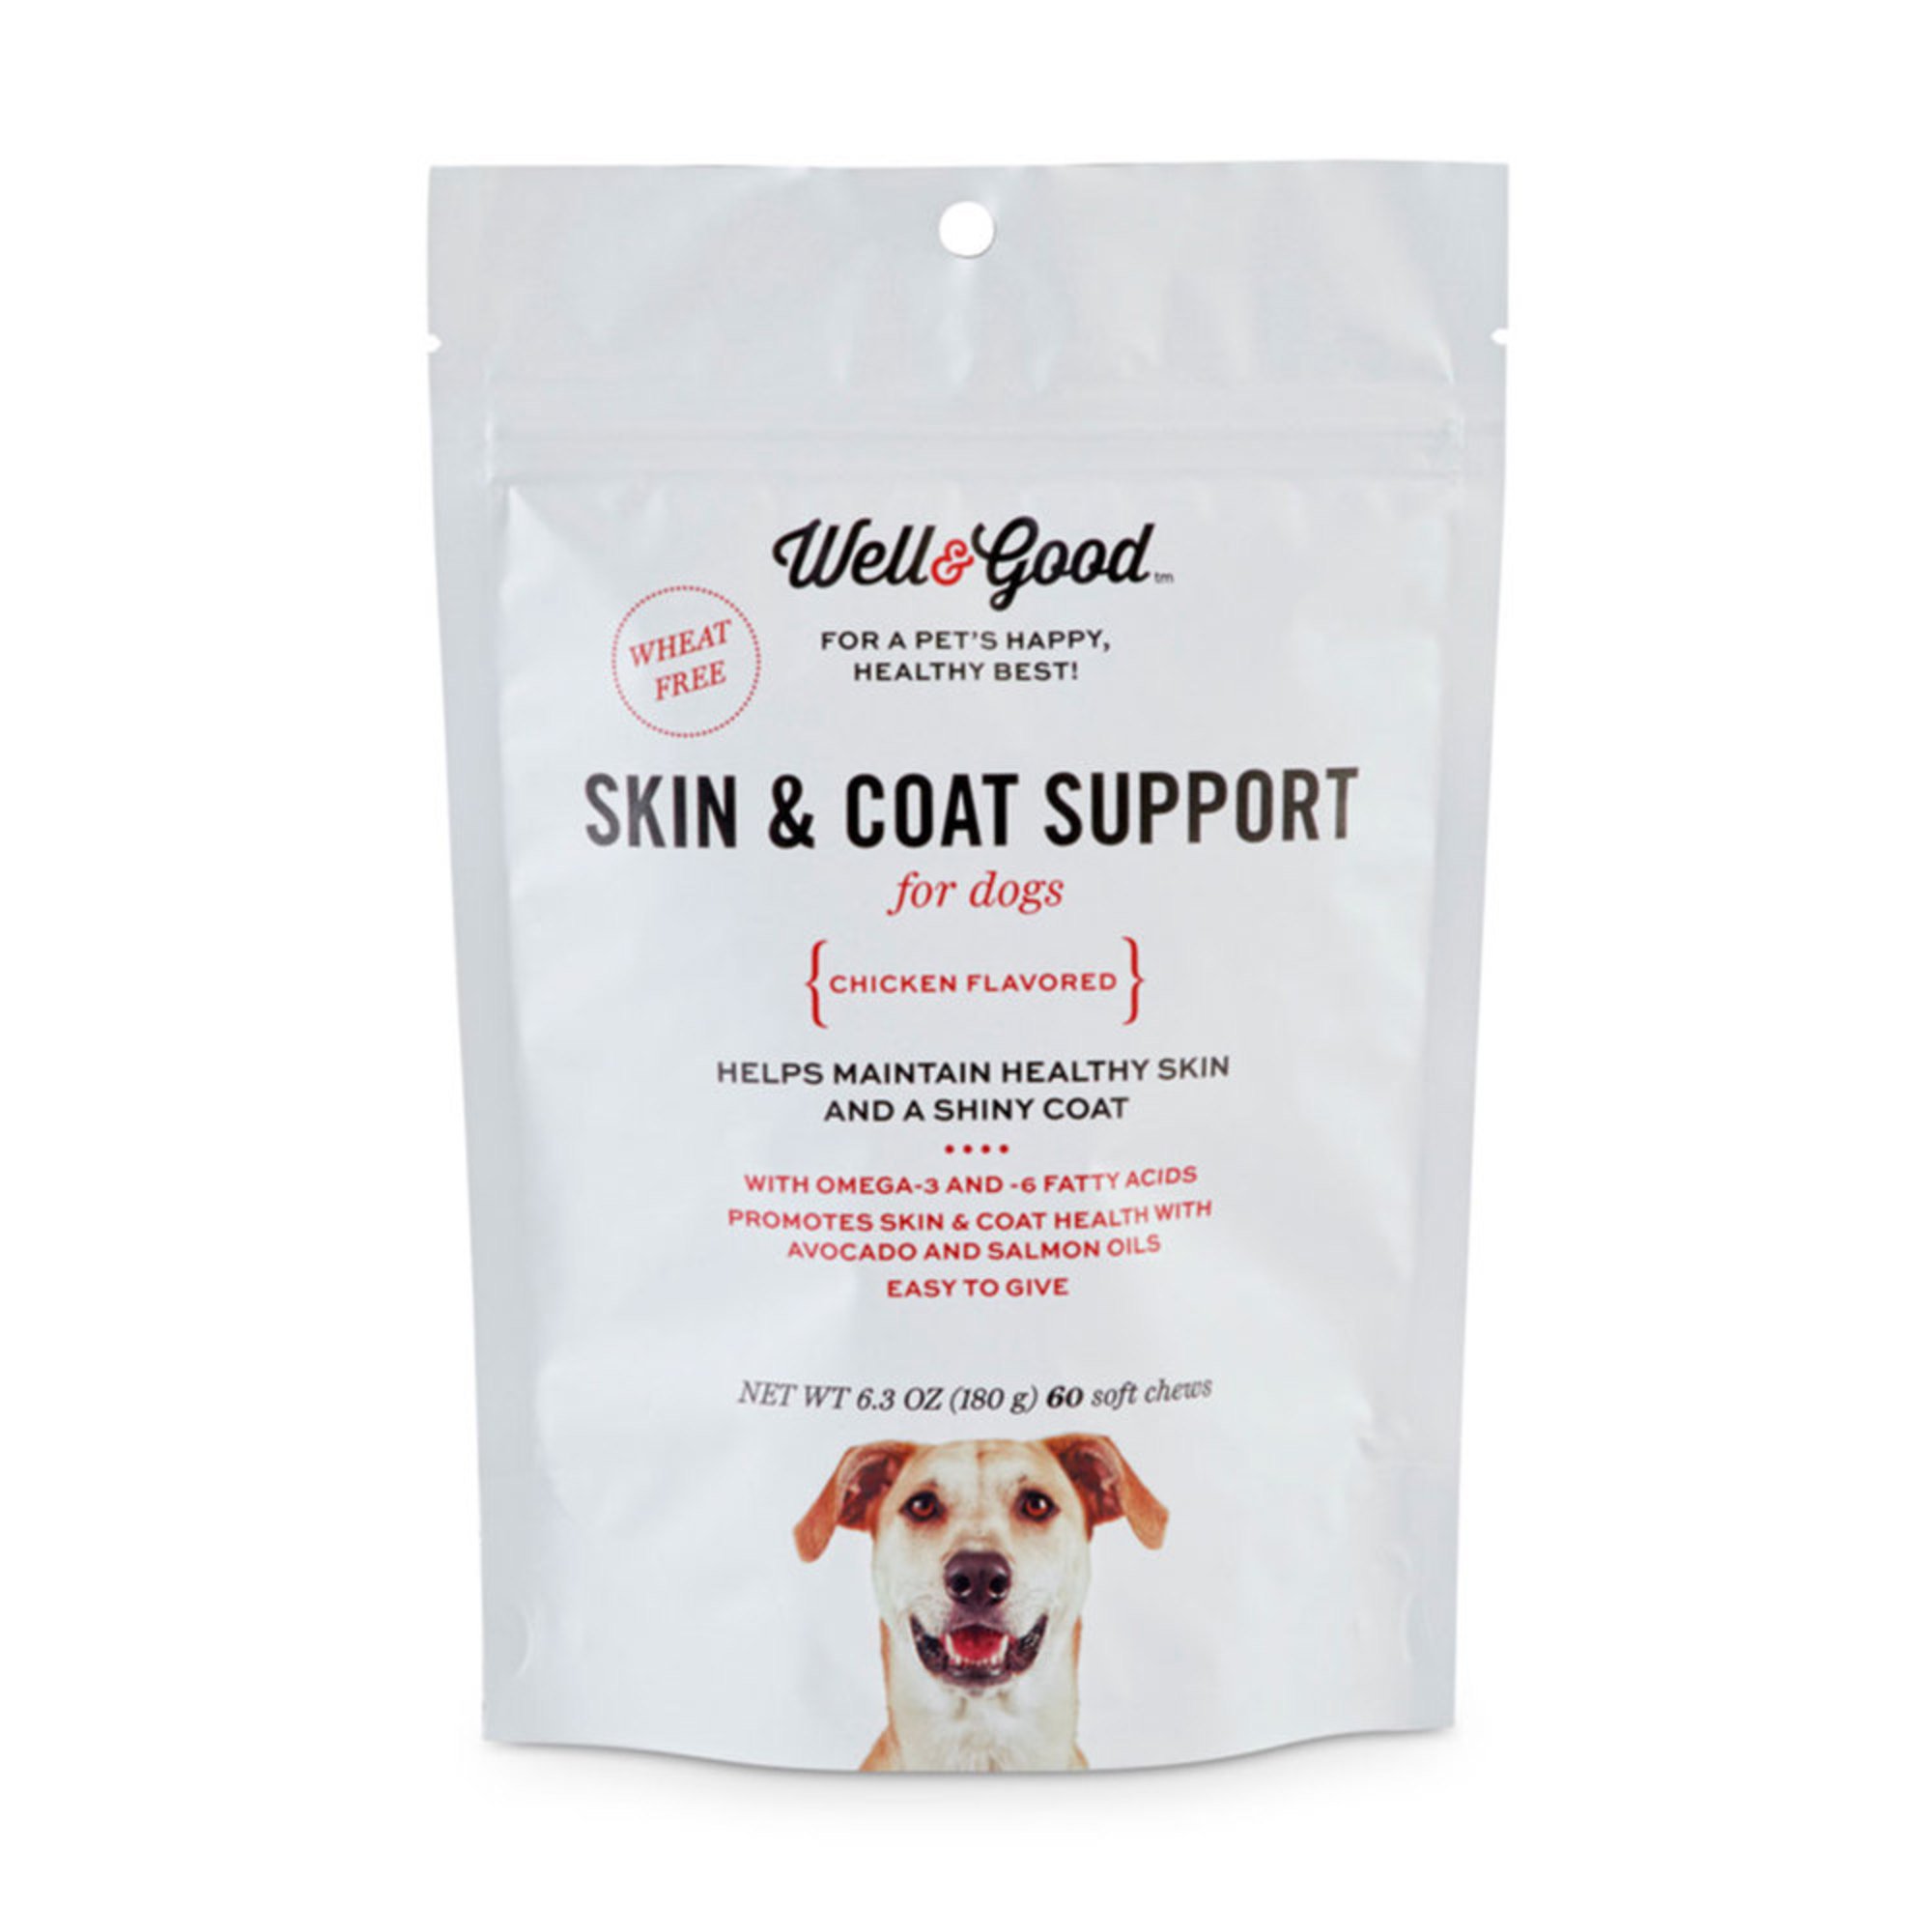 petco dog joint supplement